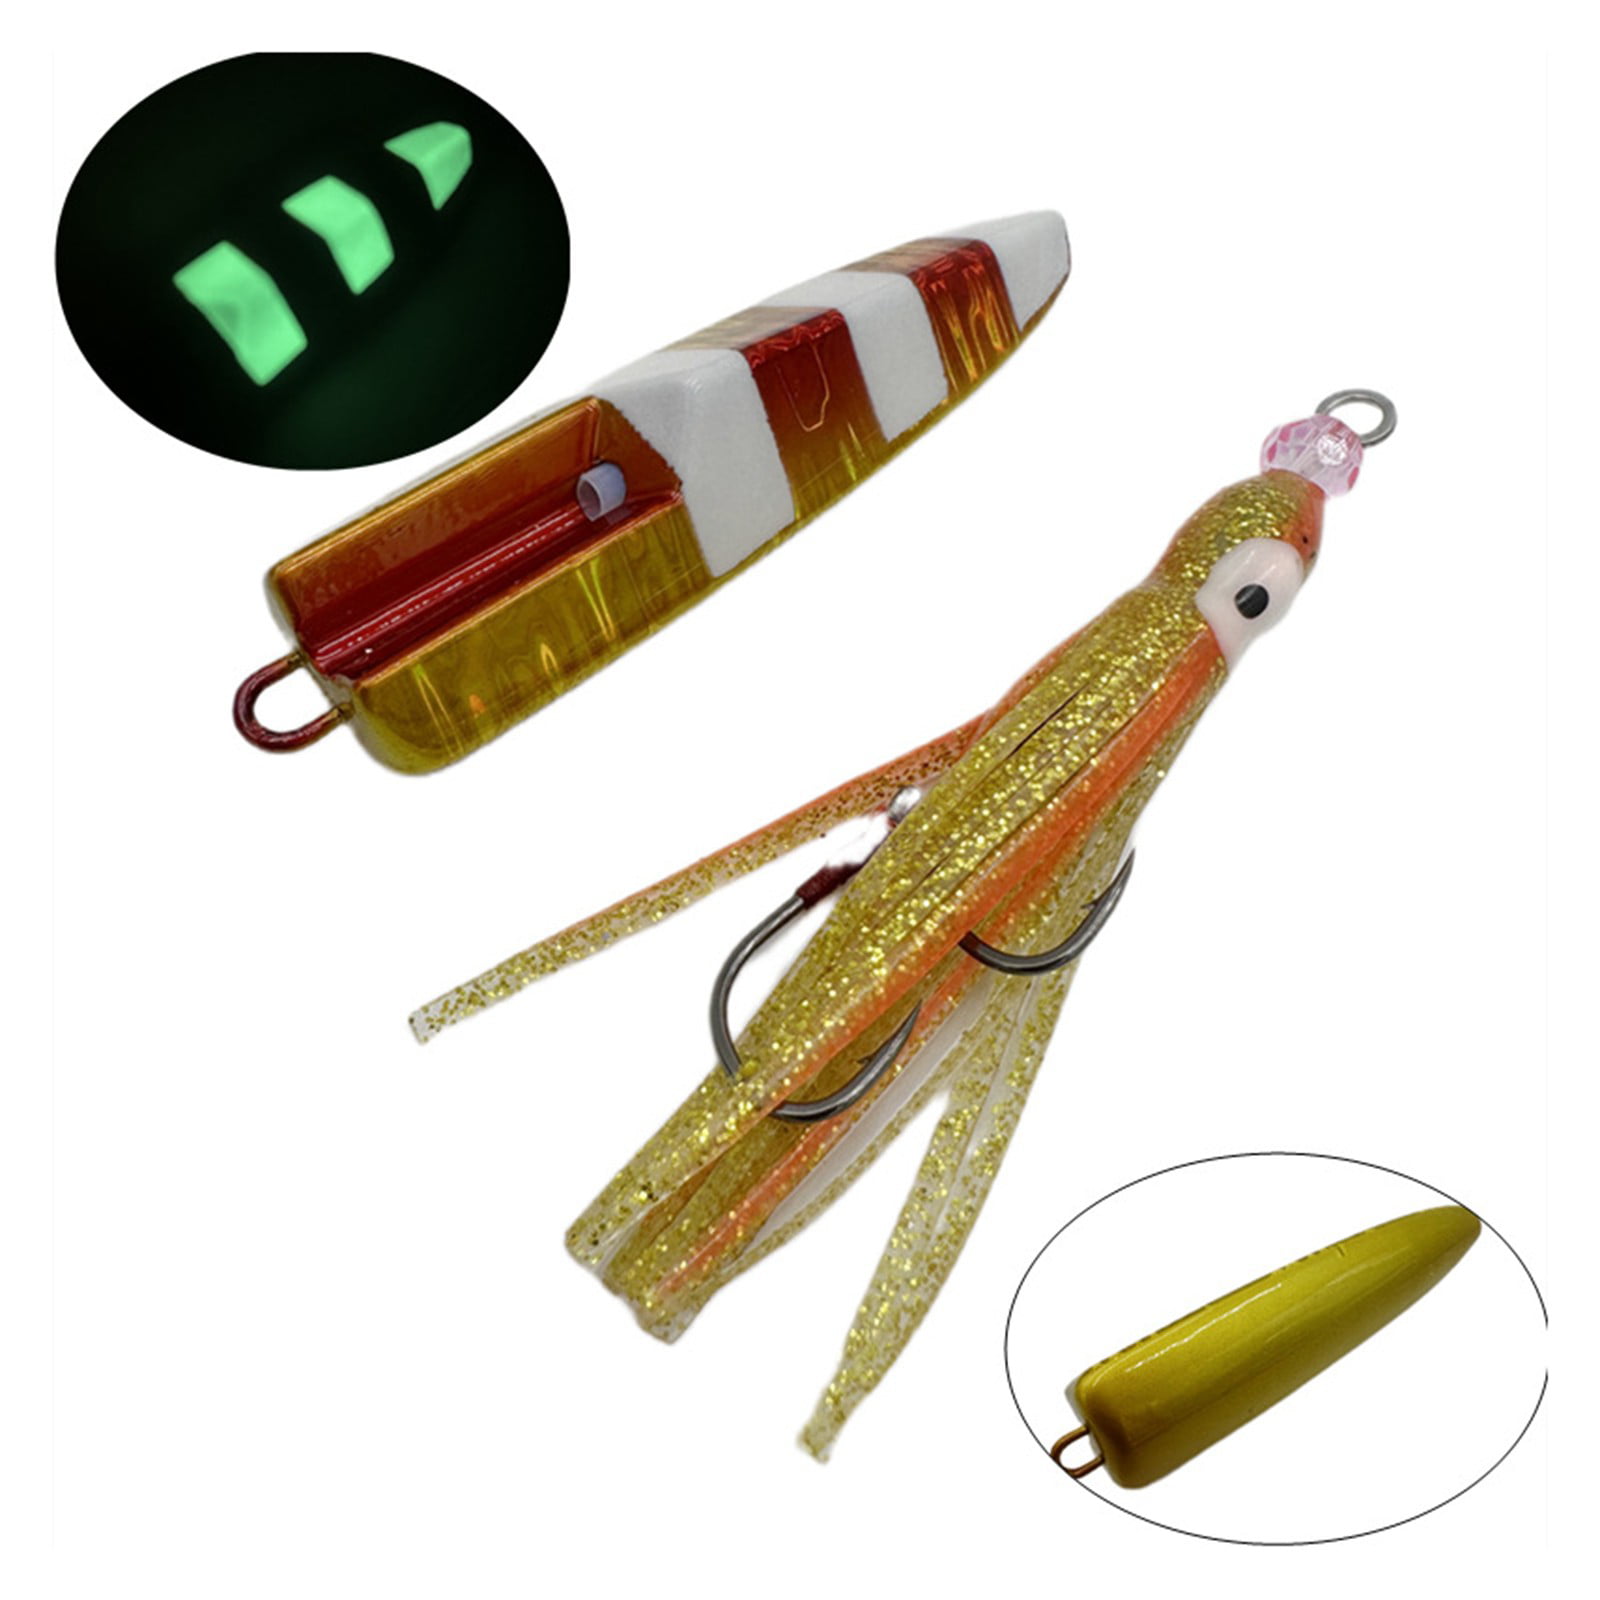 30Pcs Supple Plastic Fishing Lures Vivid Lures for Pike Perch